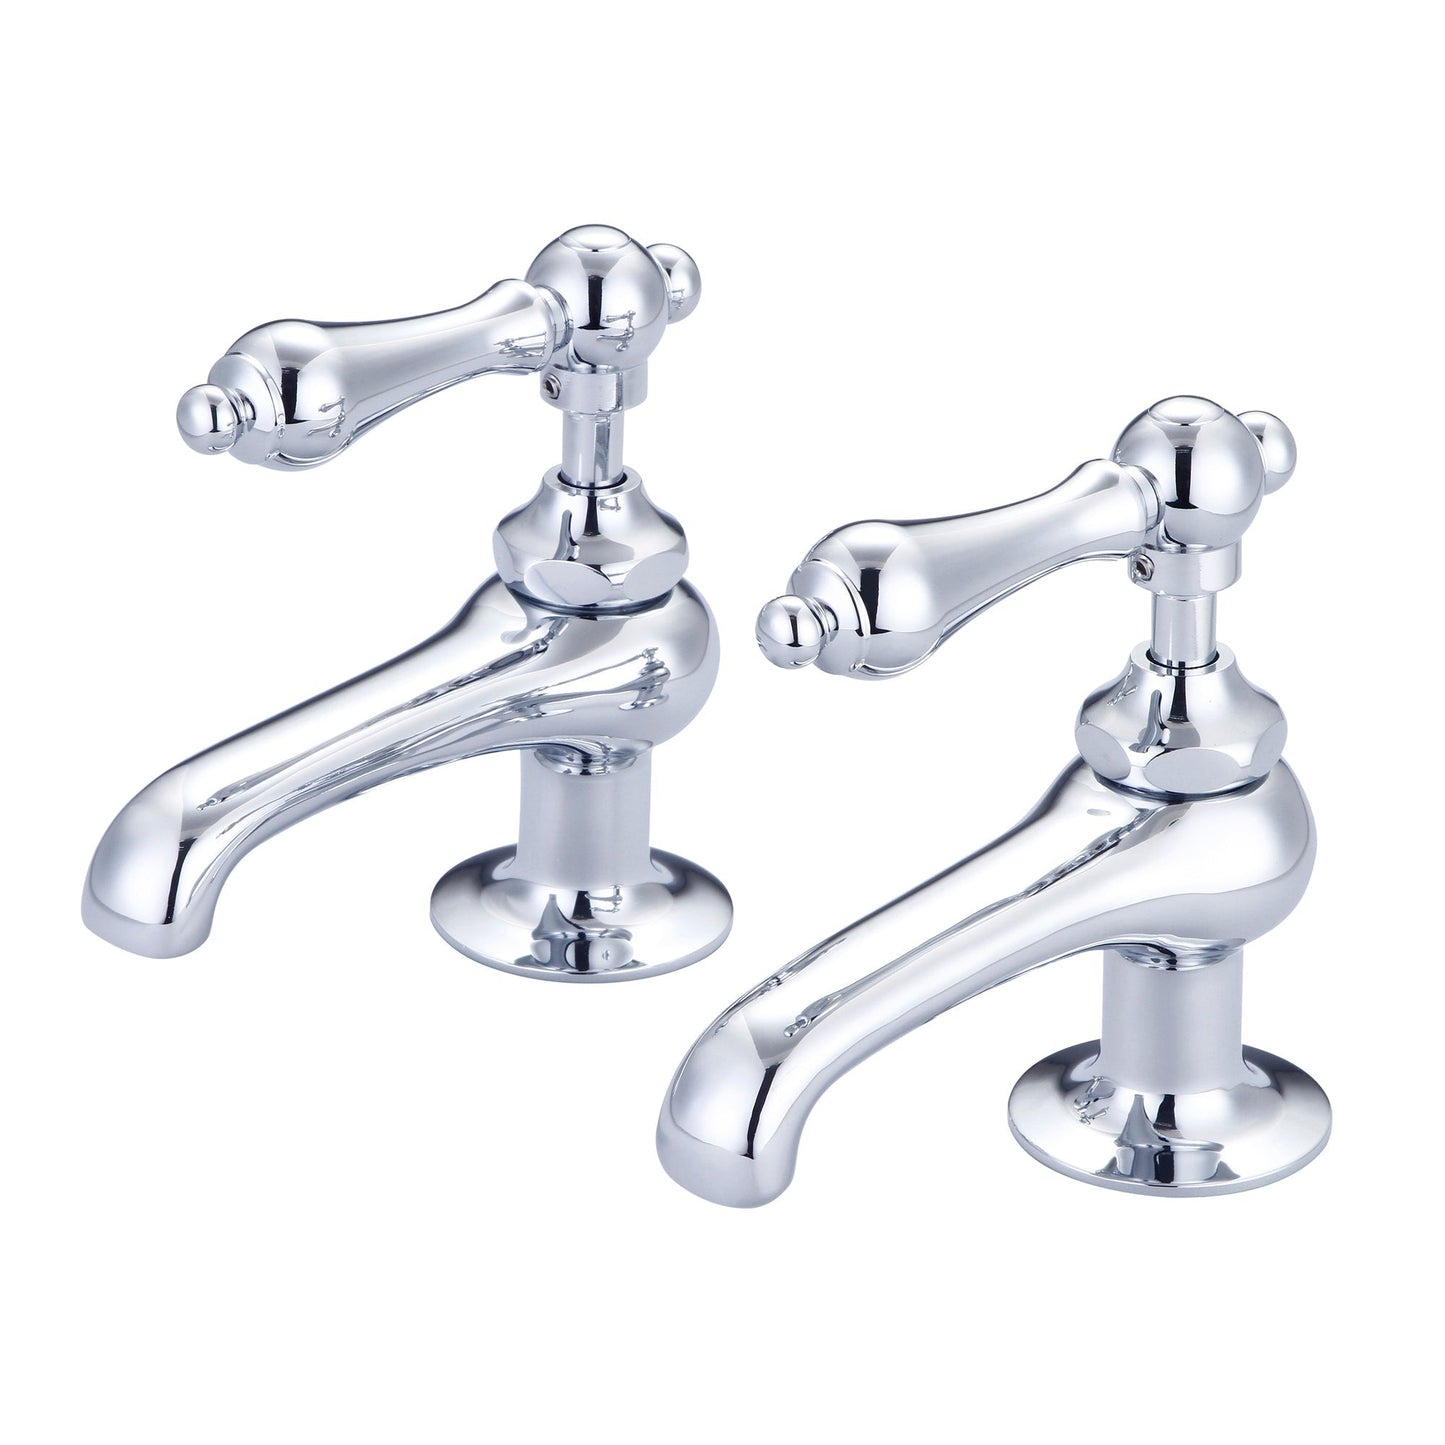 Water Creation Vintage Classic Basin Cocks Lavatory F1-0003 1.88" Silver Solid Brass Faucet With Metal Lever Handles Without Labels